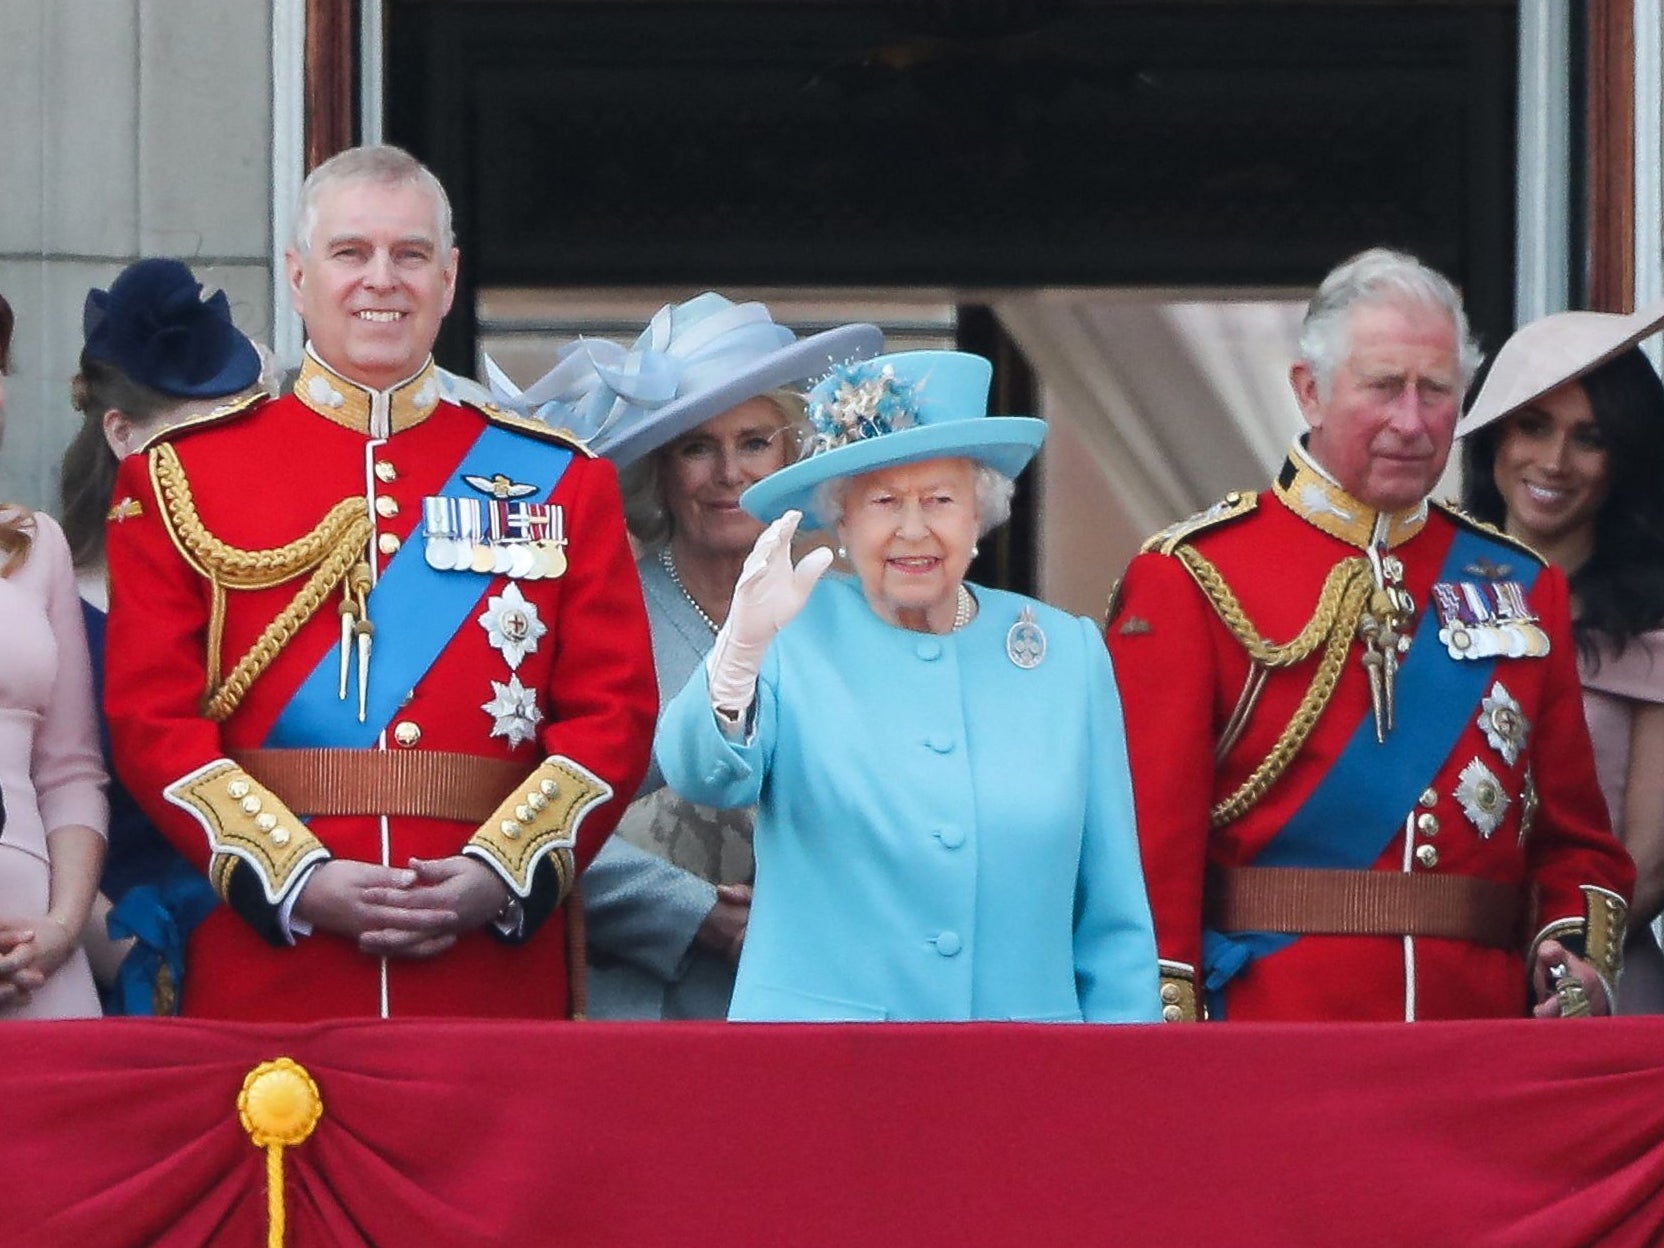 Members of the royal family, including the Duke of York, the late Queen Elizabeth II, and King Charles III, stand on the balcony of Buckingham Palace in 2018